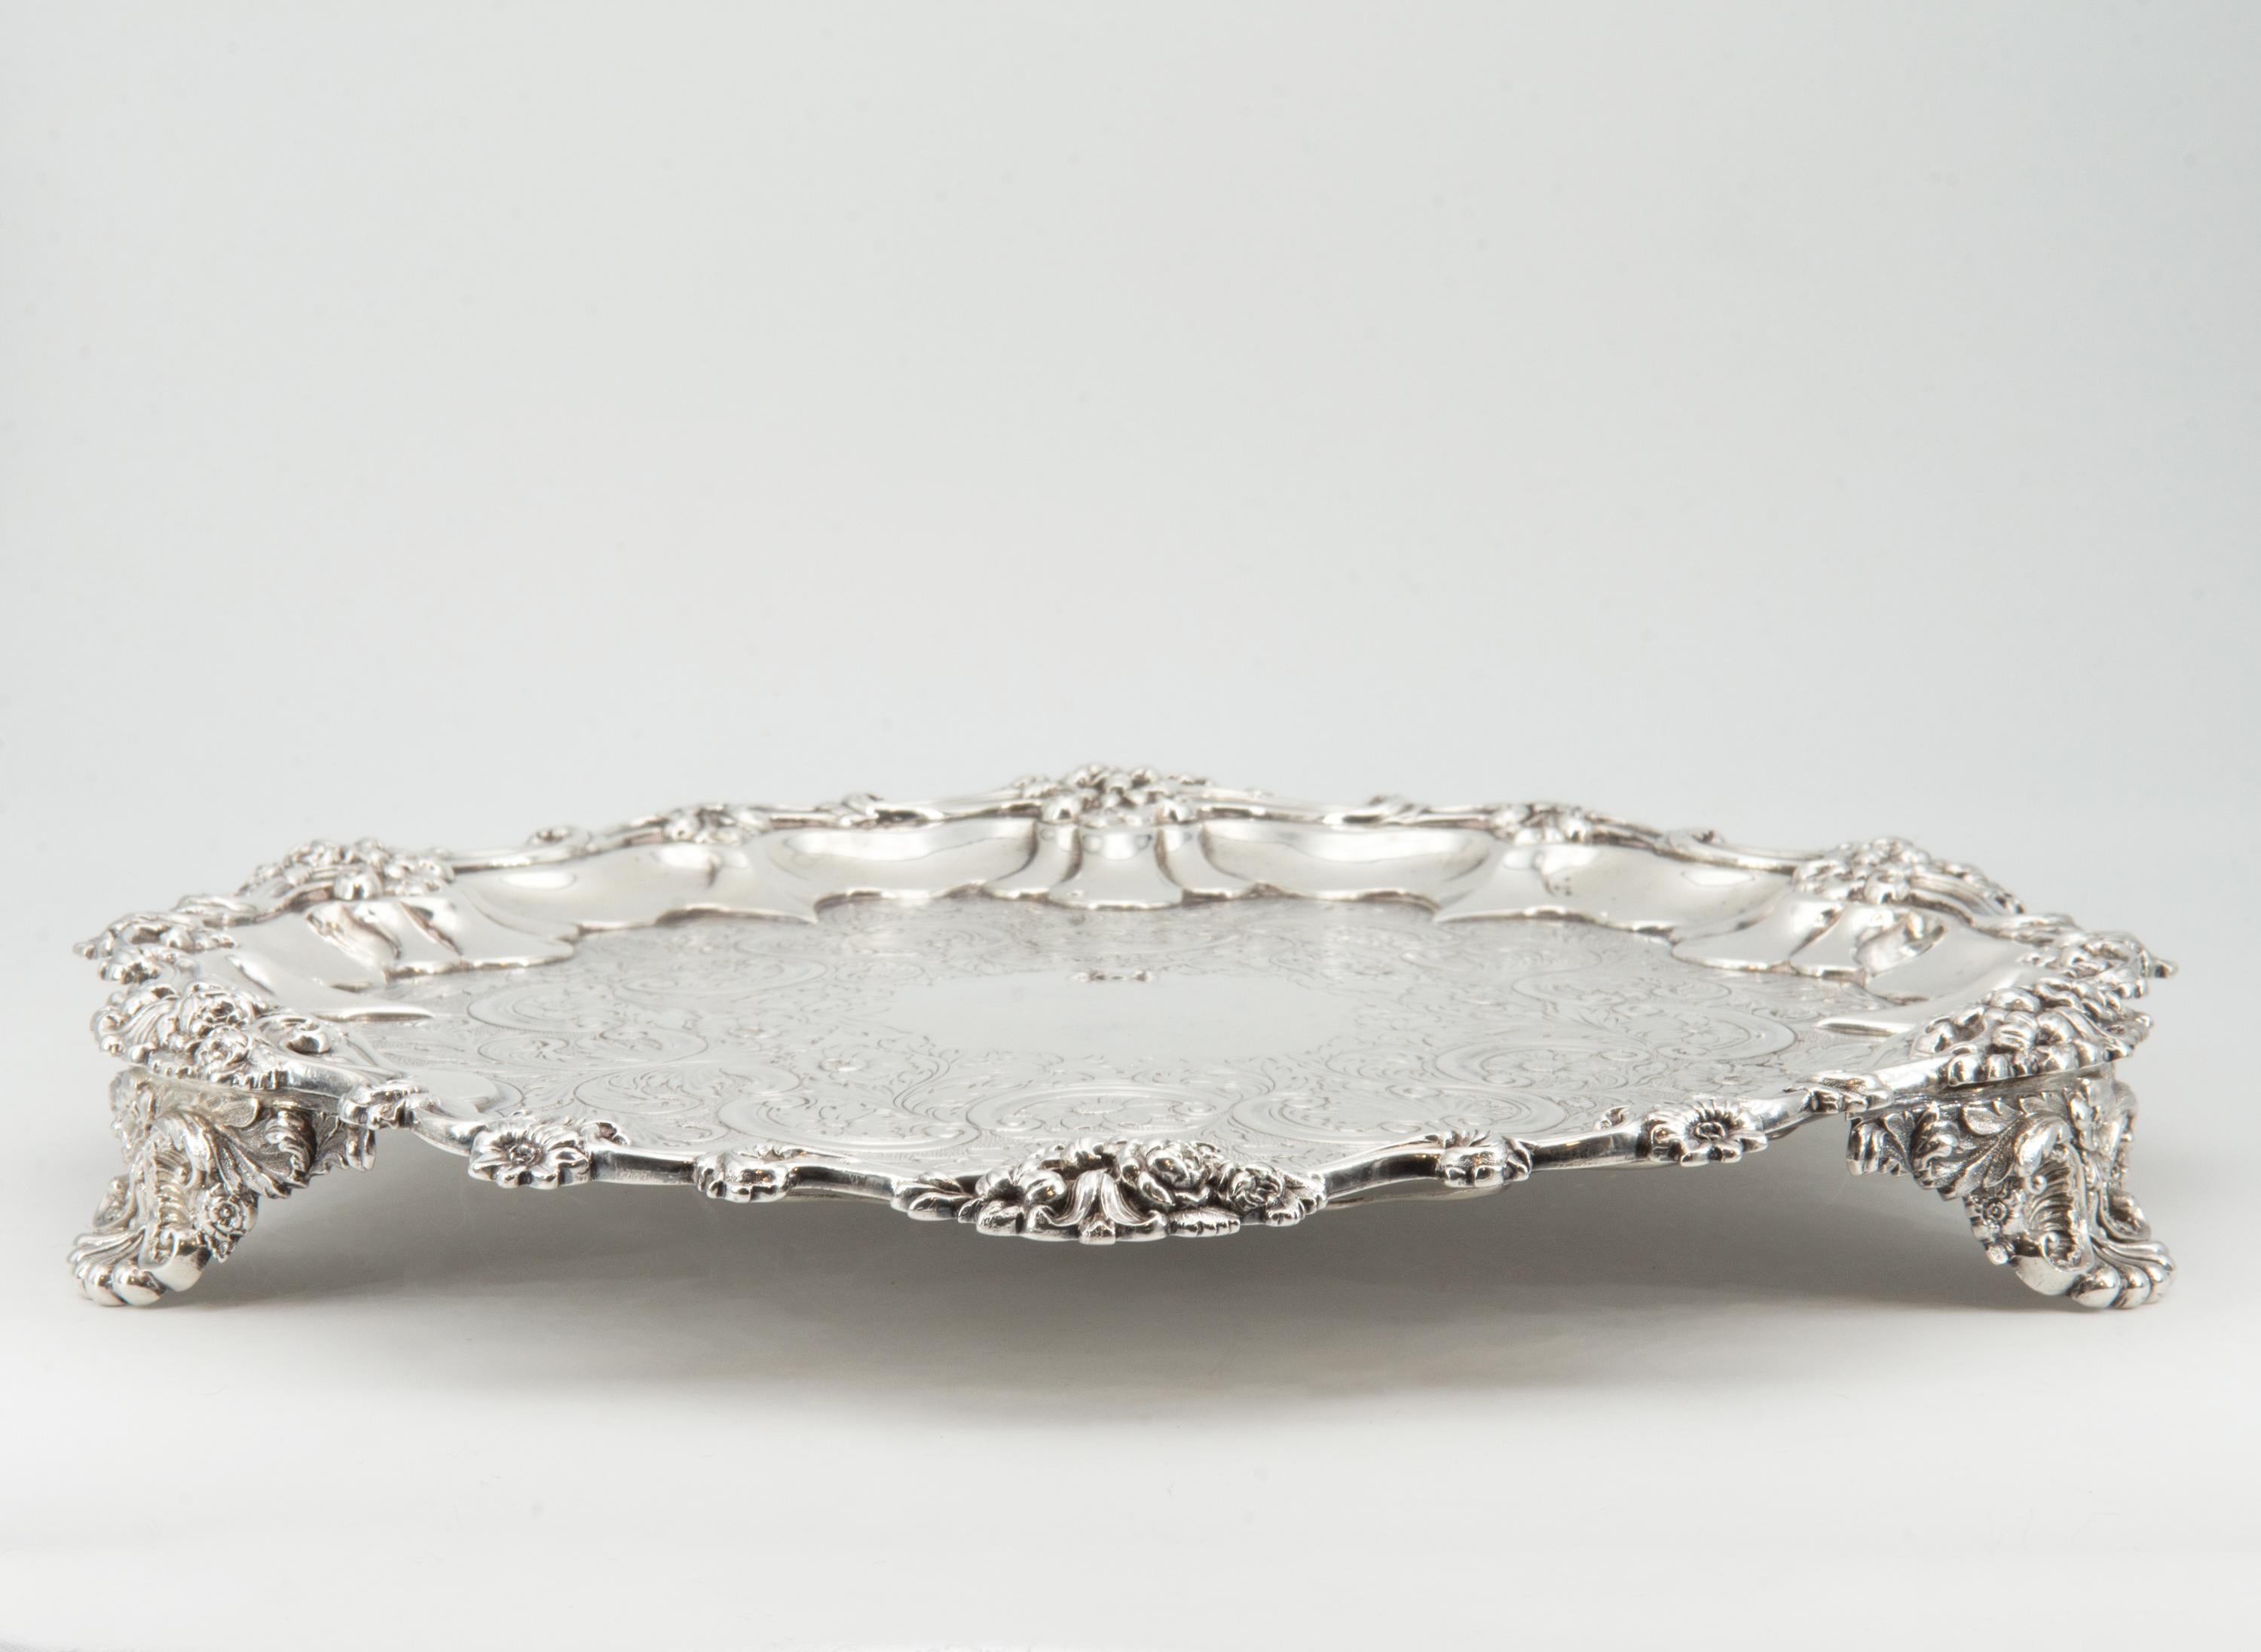 19th Century Antique William IV Sterling Silver Flat-Chased Waiter Tray London 1831 For Sale